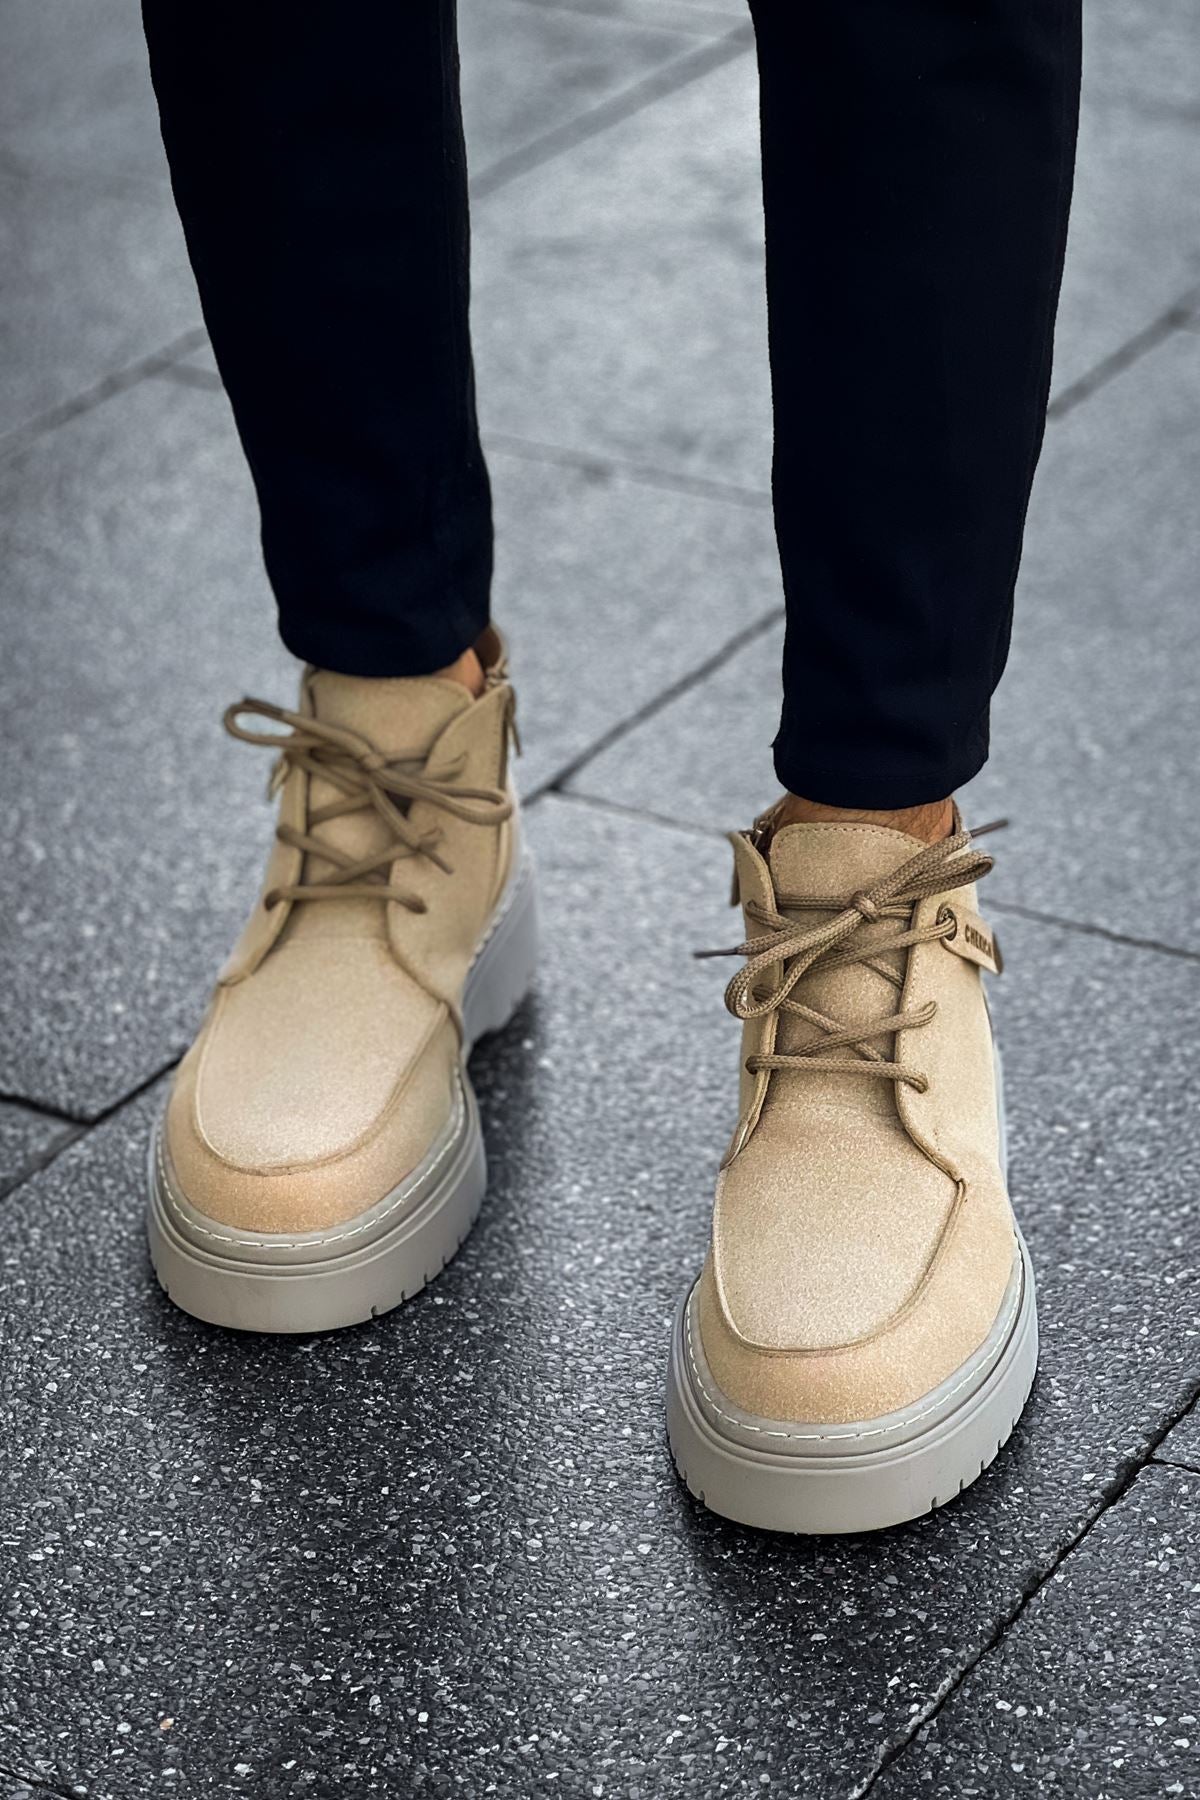 CH213 Men's Boots SAND Suede - STREETMODE™